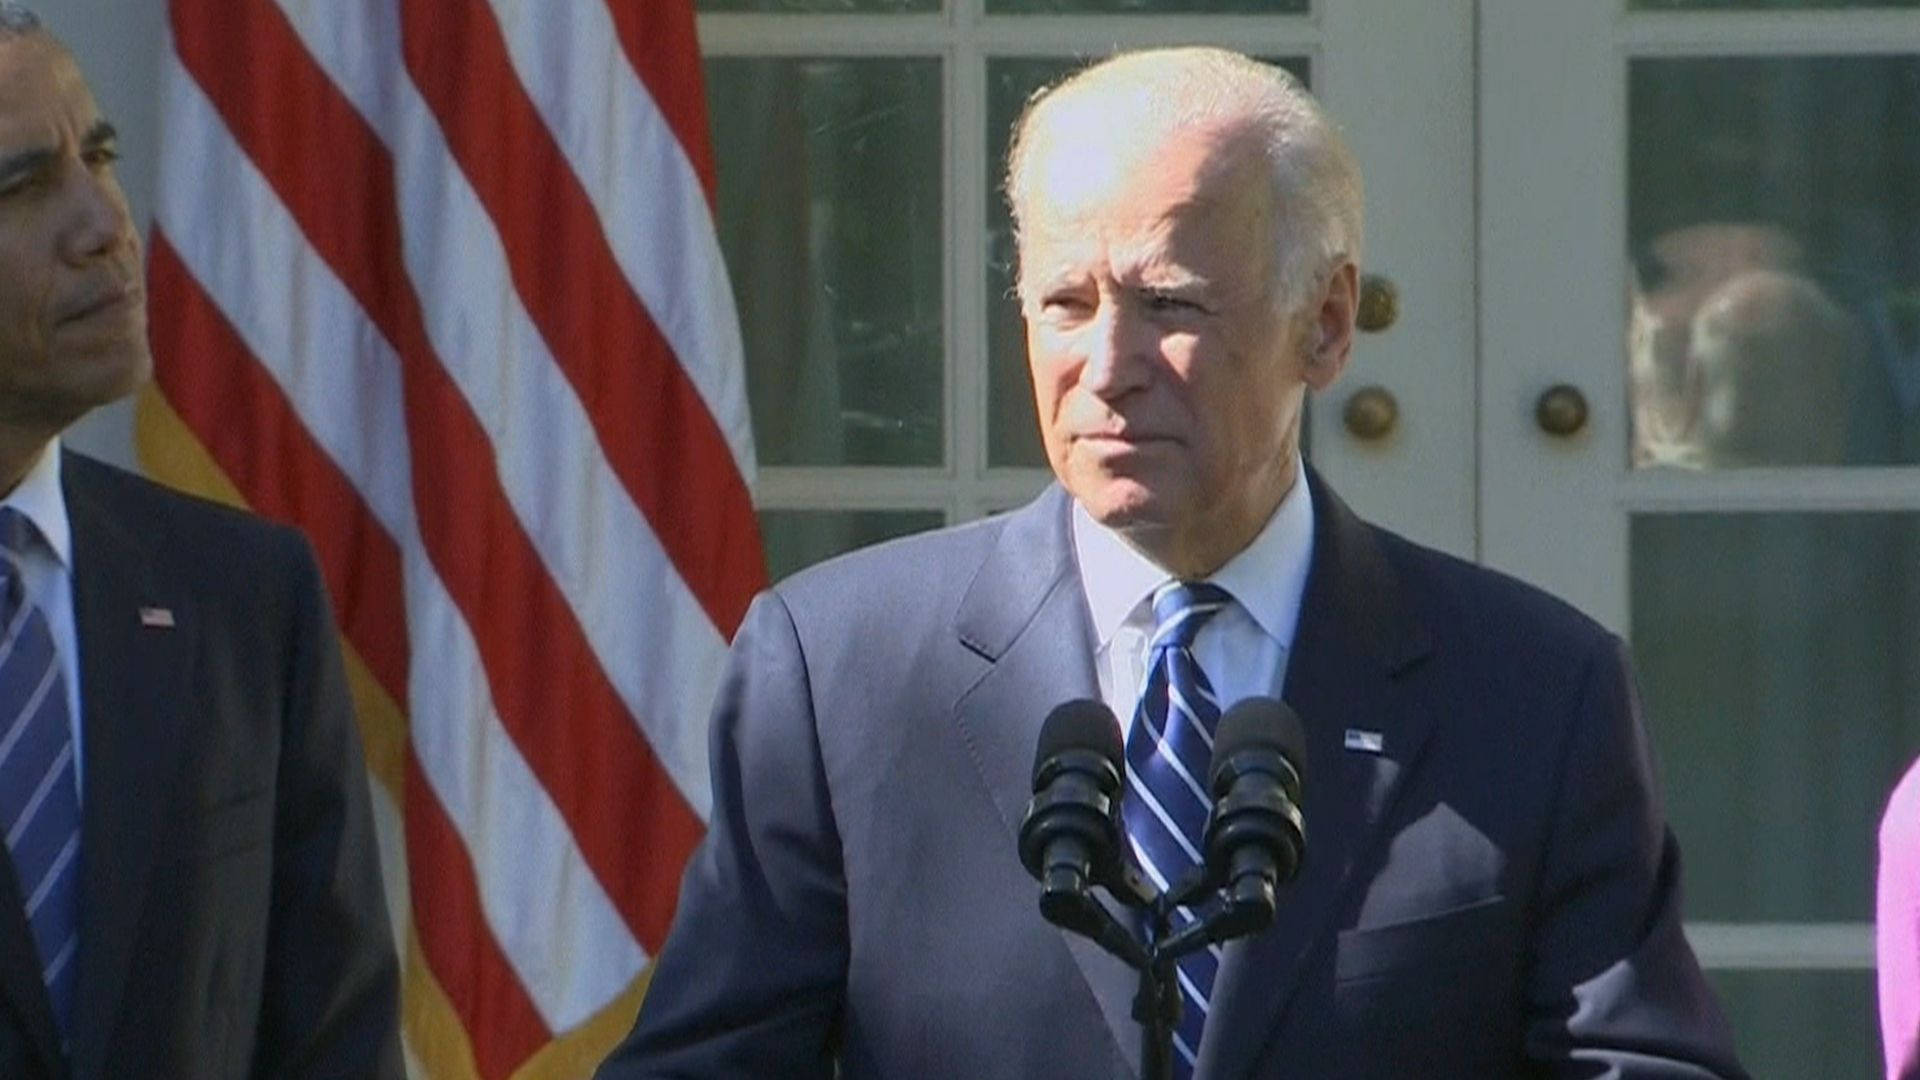 Joe Biden delivers an empowering speech to a crowd in the morning. Wallpaper